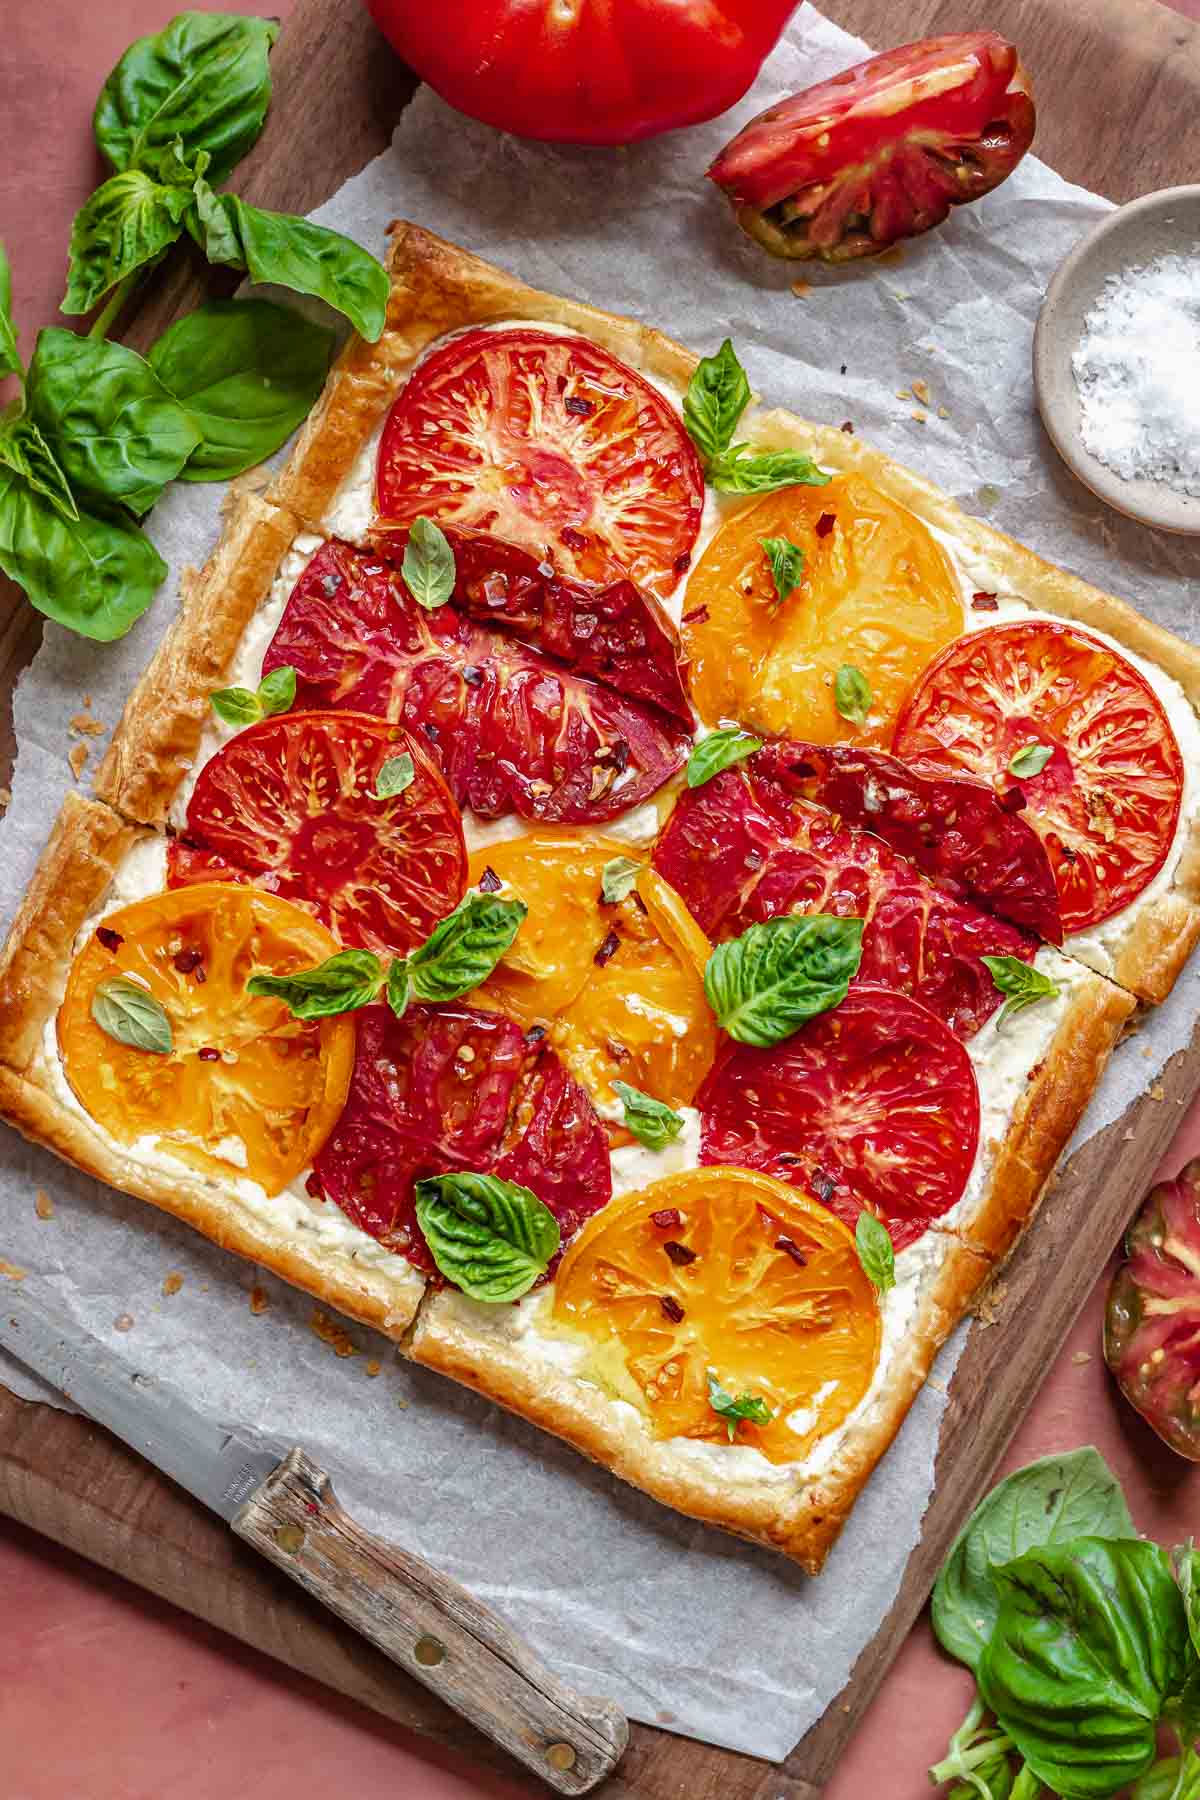 Tomato tart finished with basil, olive oil, flaky salt, and red pepper flakes on a cutting board.